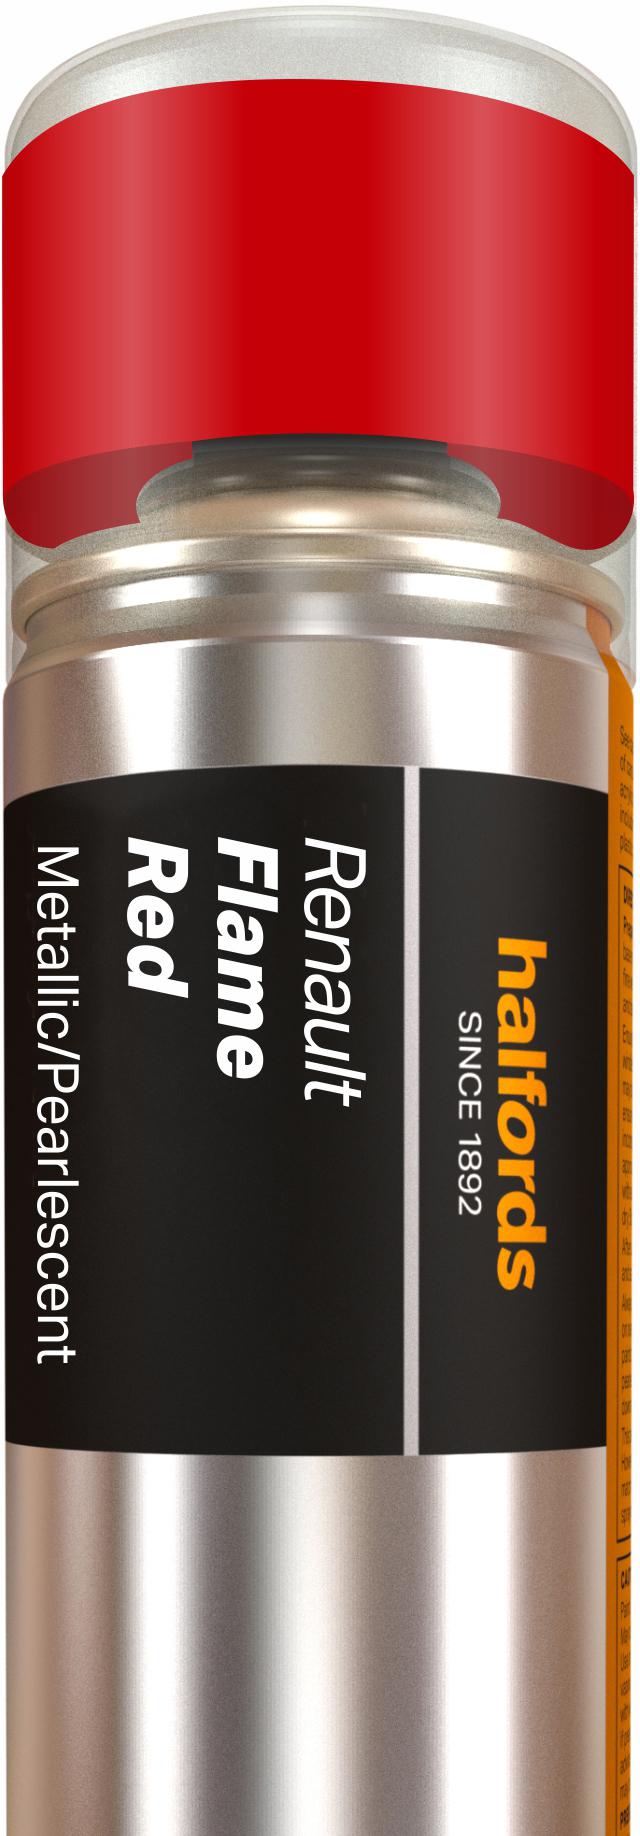 Halfords Renault Flame Red Car Spray Paint 300Ml